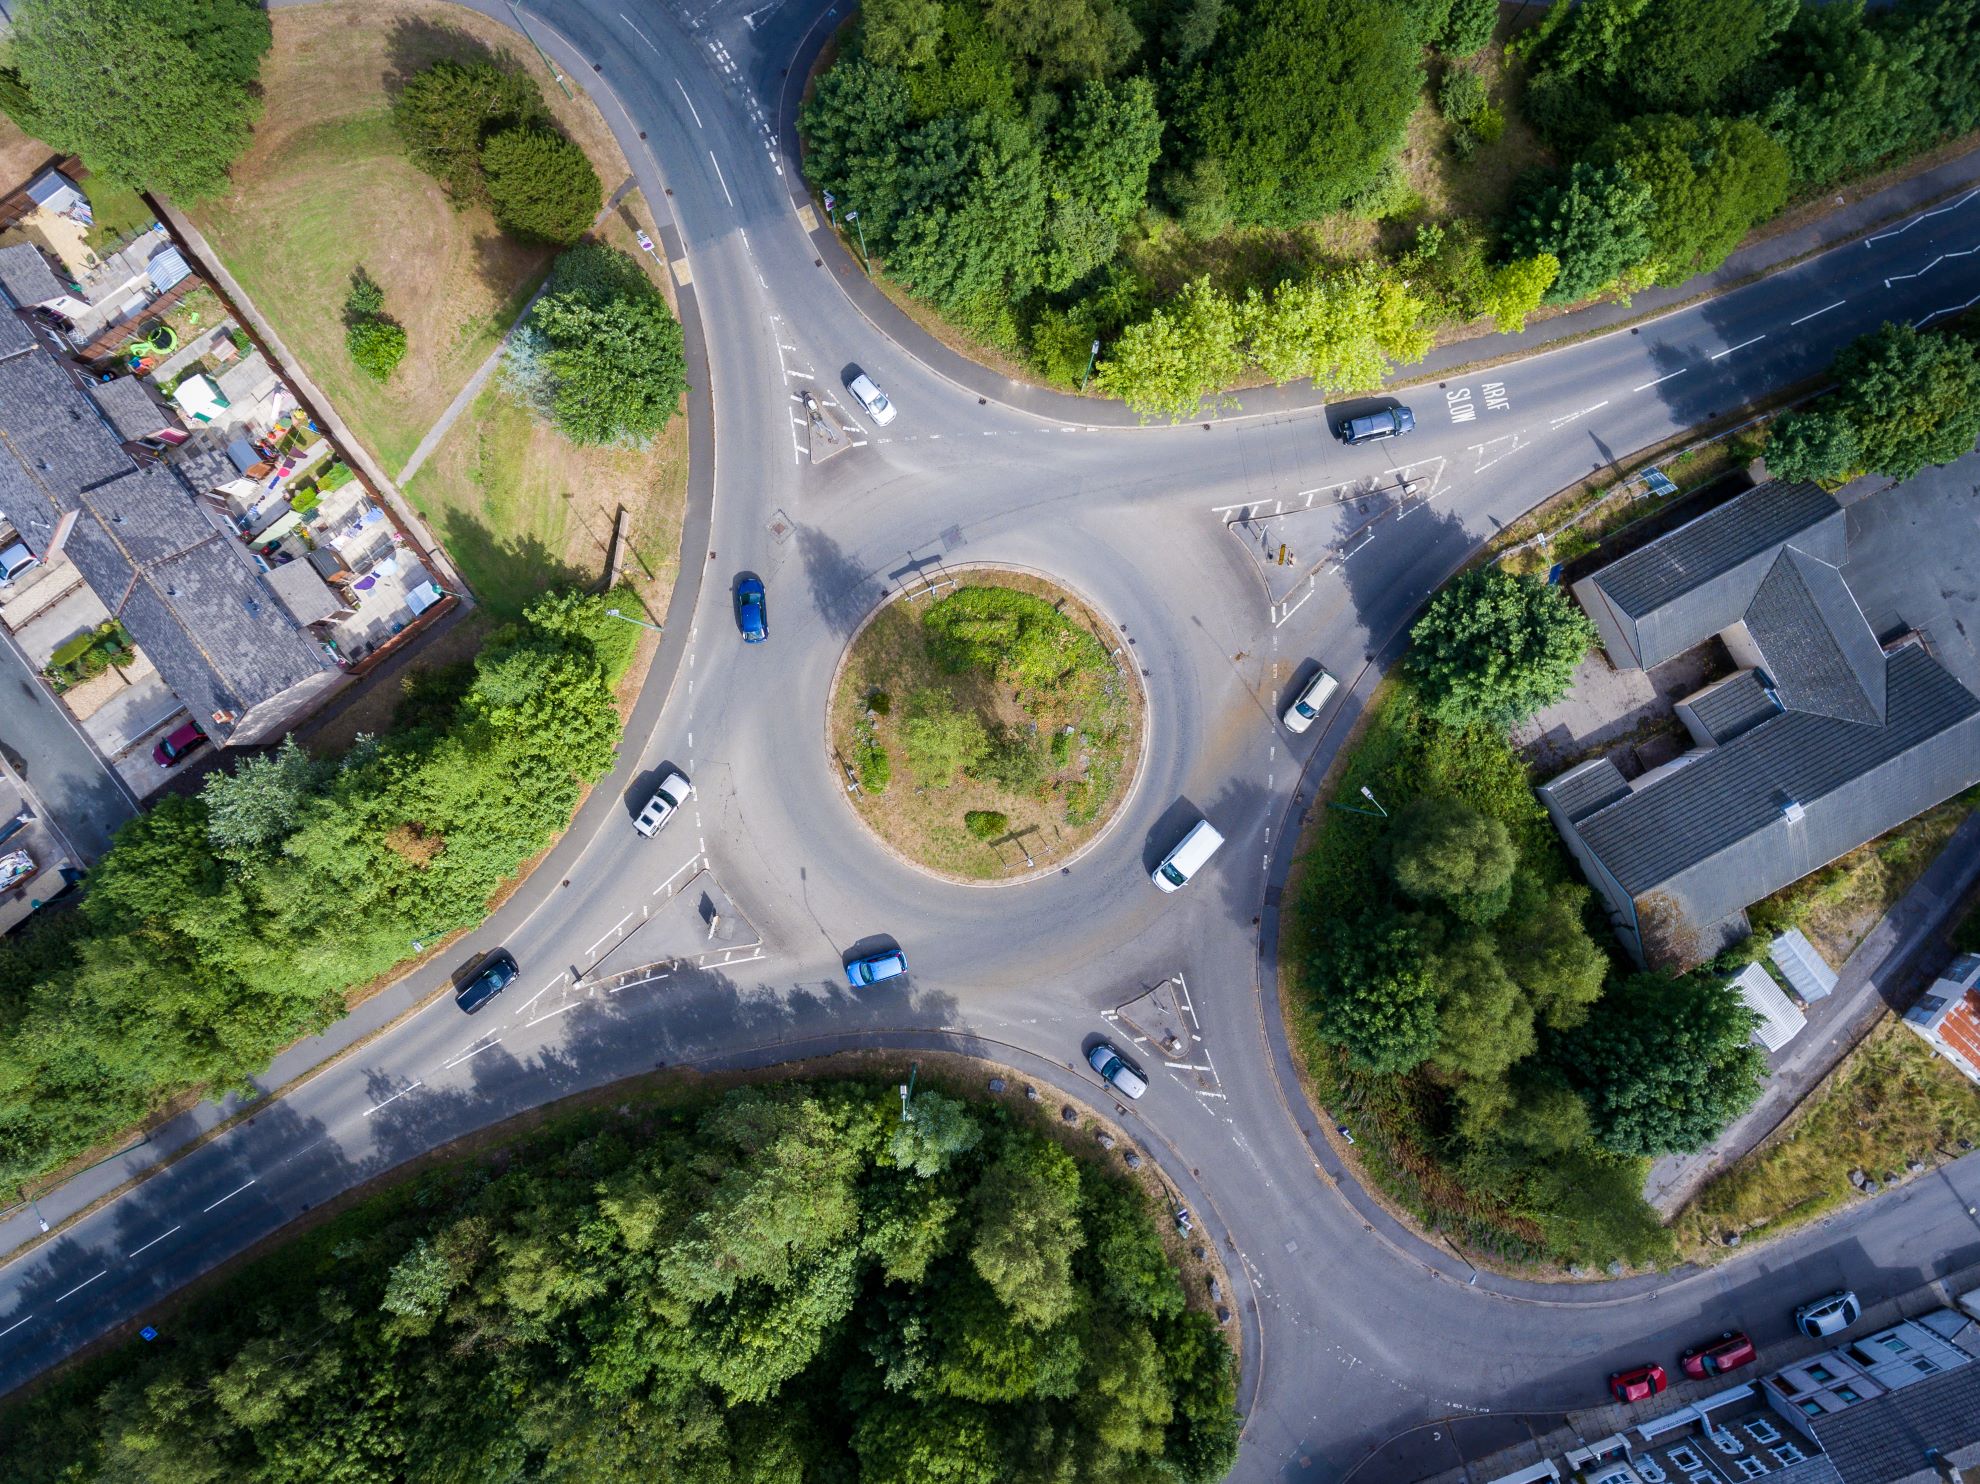 A roundabout with four exits surrounded by lots of greenery and trees.